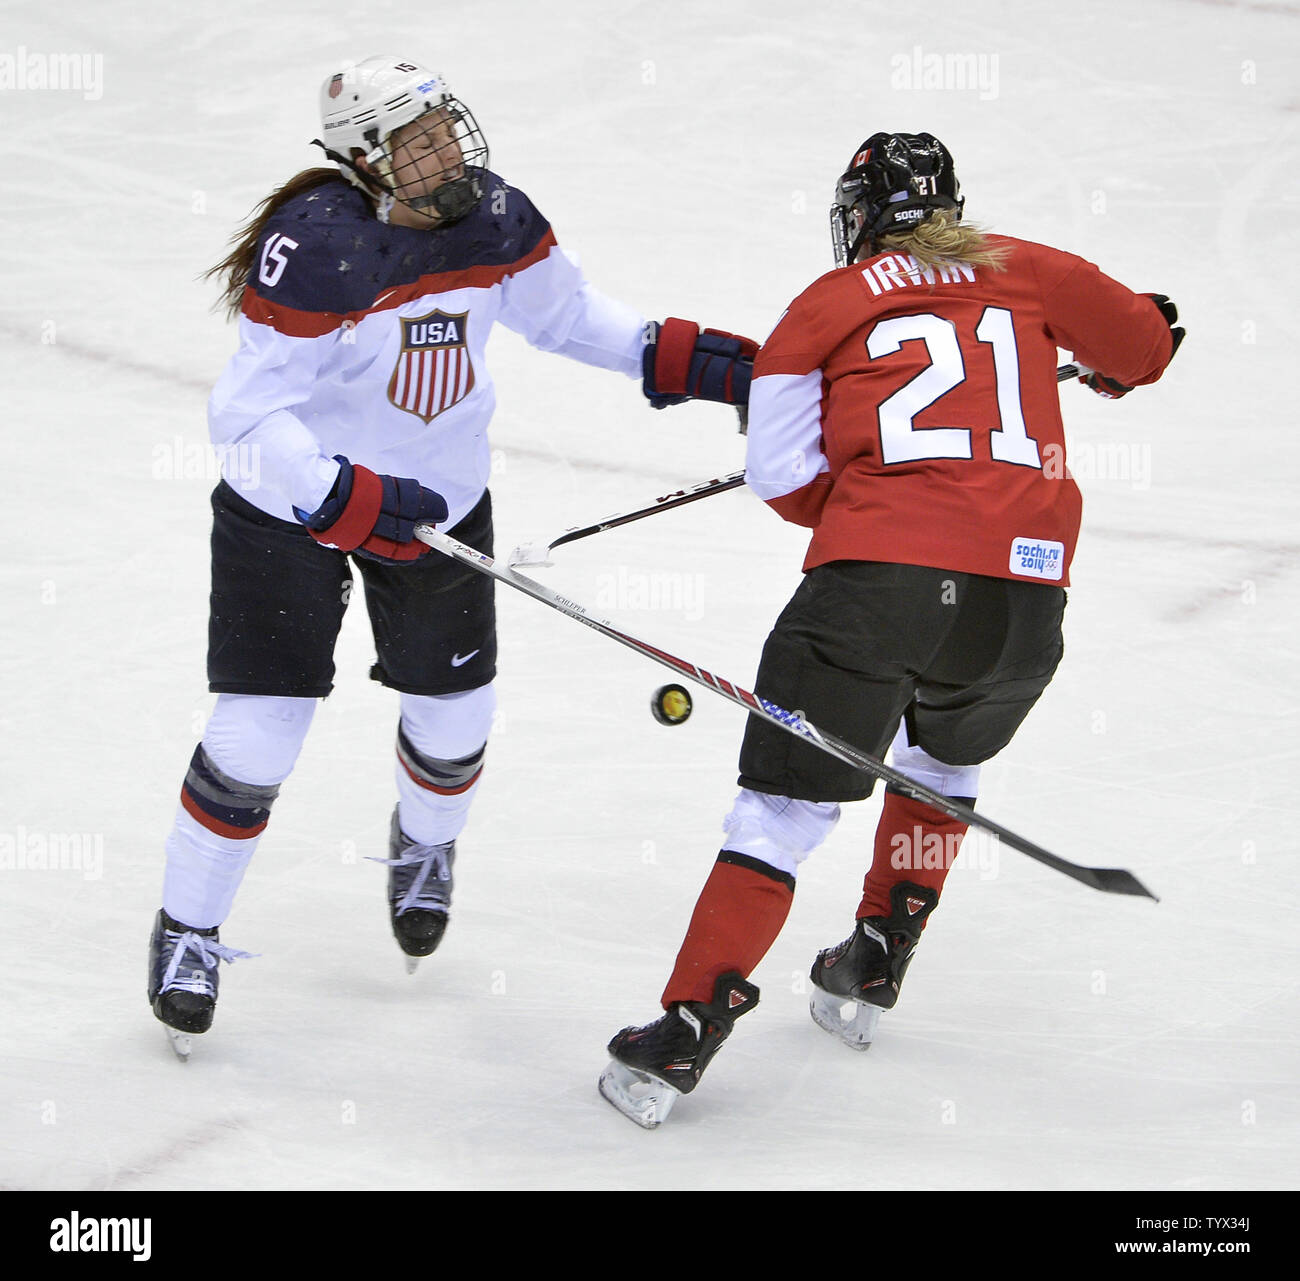 United States' Anne Schleper (L) and Canada's Haley Irwin go for the puck during the first period of the women's gold medal ice hockey game at the Sochi 2014 Winter Olympics on February 20, 2014 in Sochi, Russia.     UPI/Brian Kersey Stock Photo